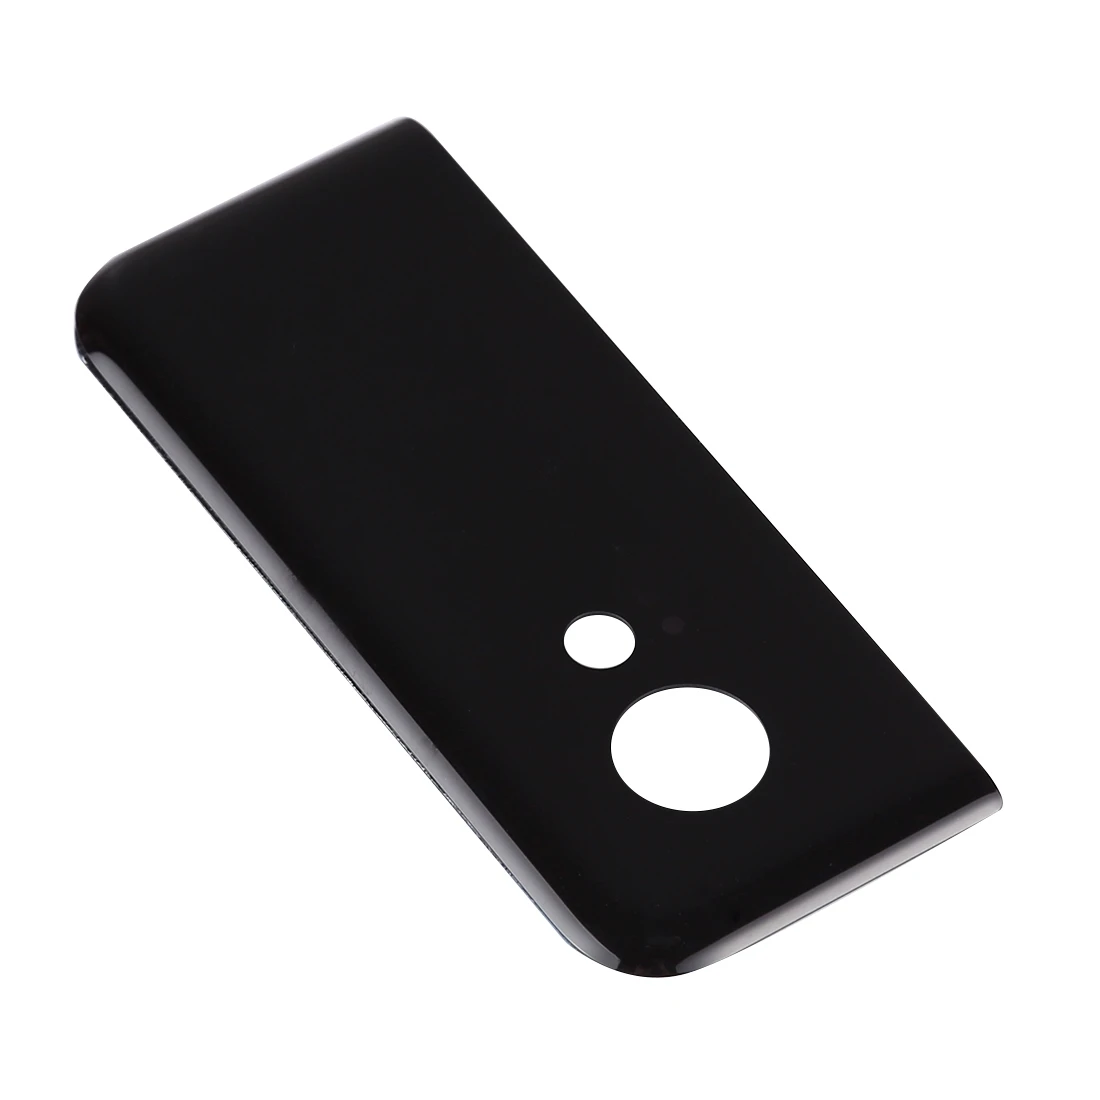 Back Cover Top Glass Lens Cover for Google Pixel 2/Pixel 2 XL images - 6